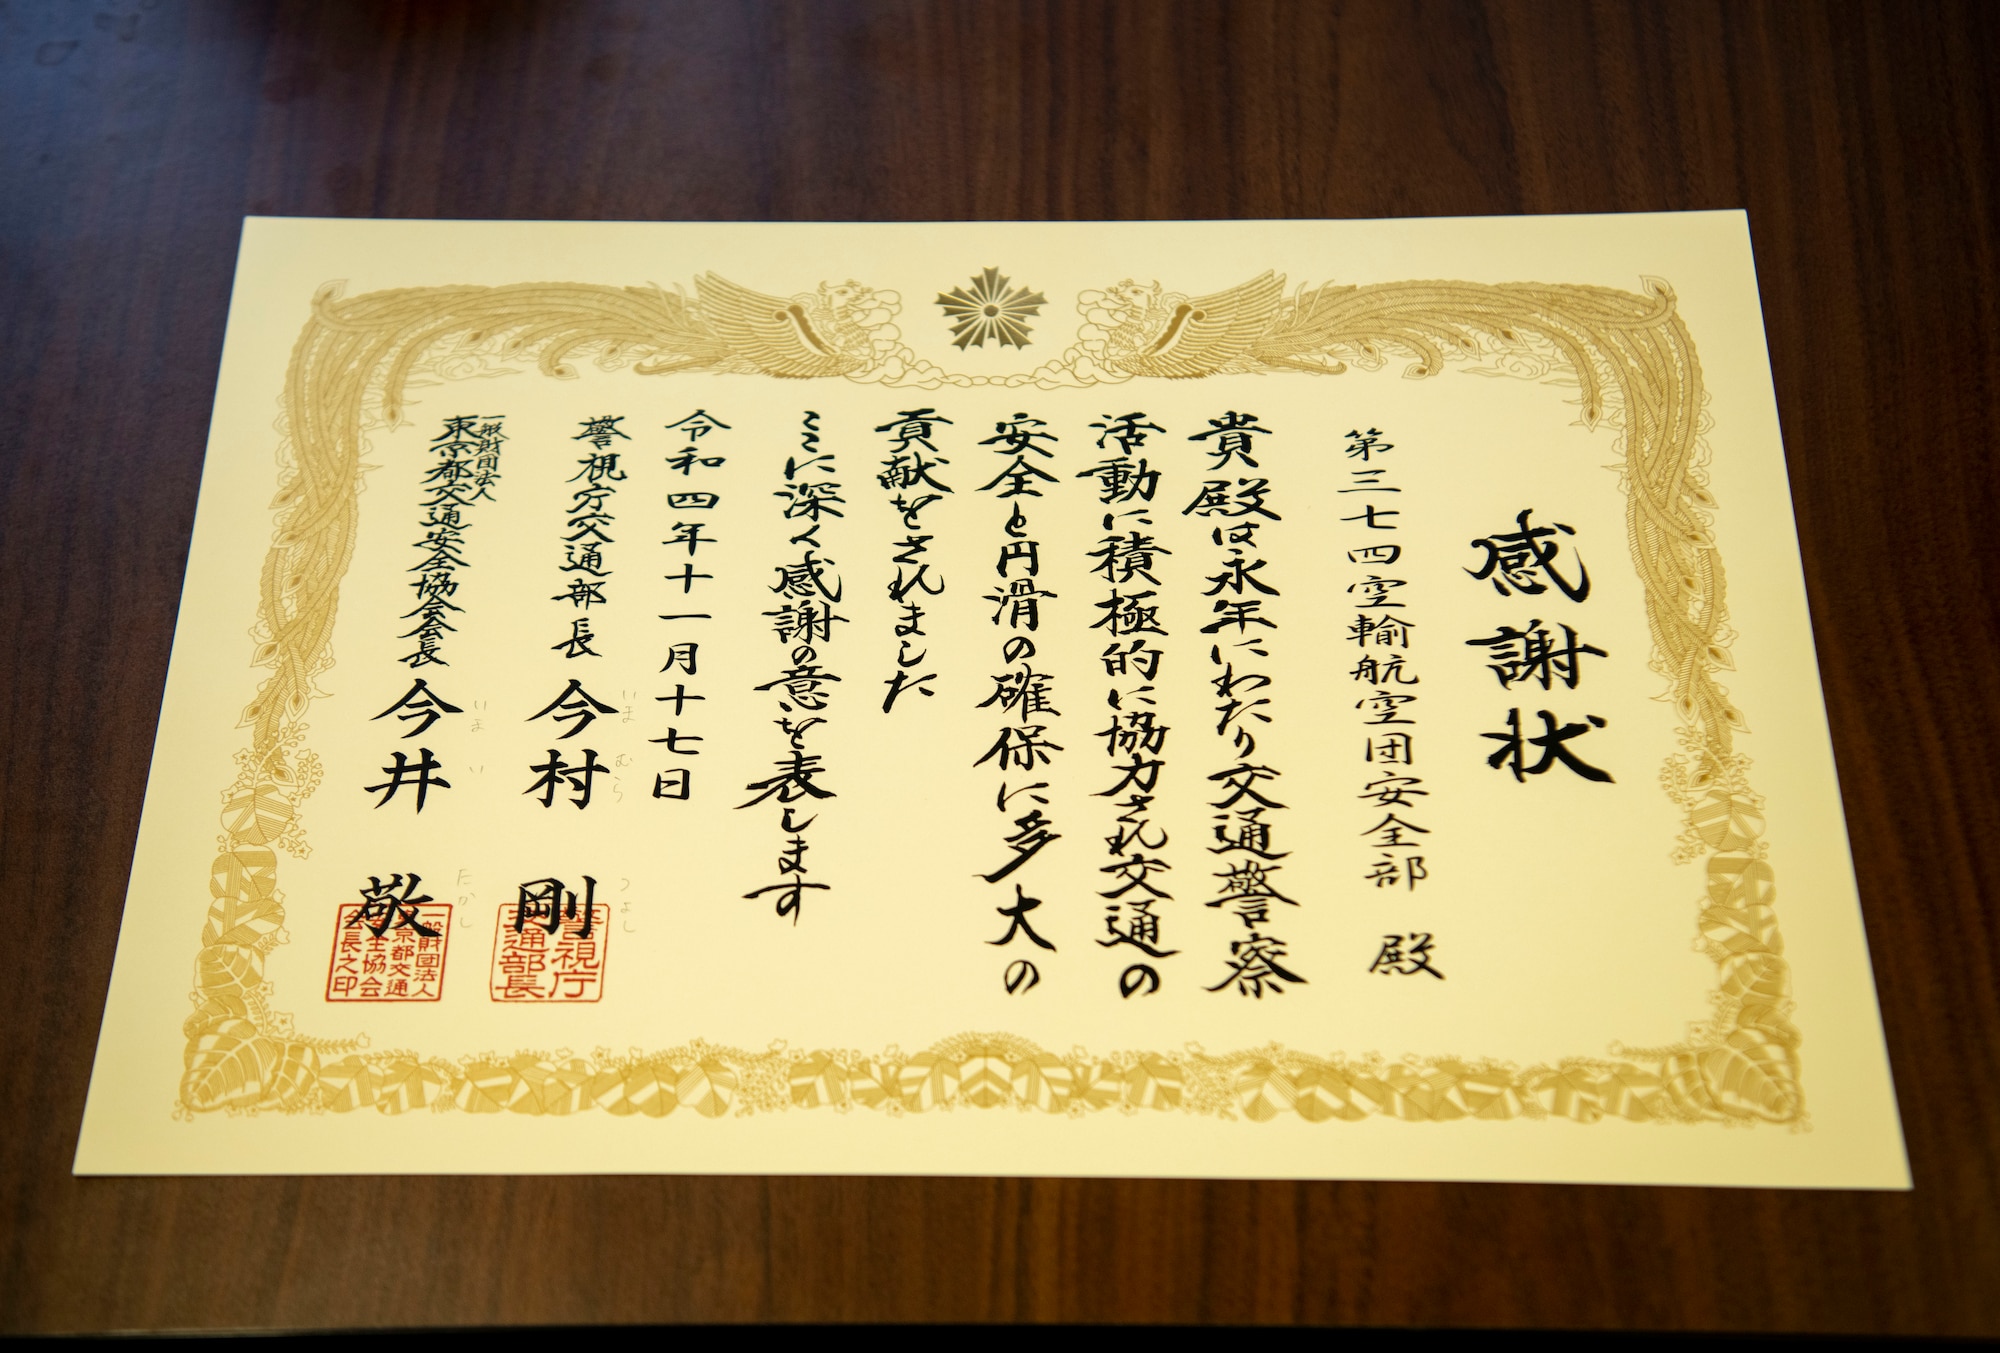 A certificate is displayed on a table with Japanese kanji describing the safety award